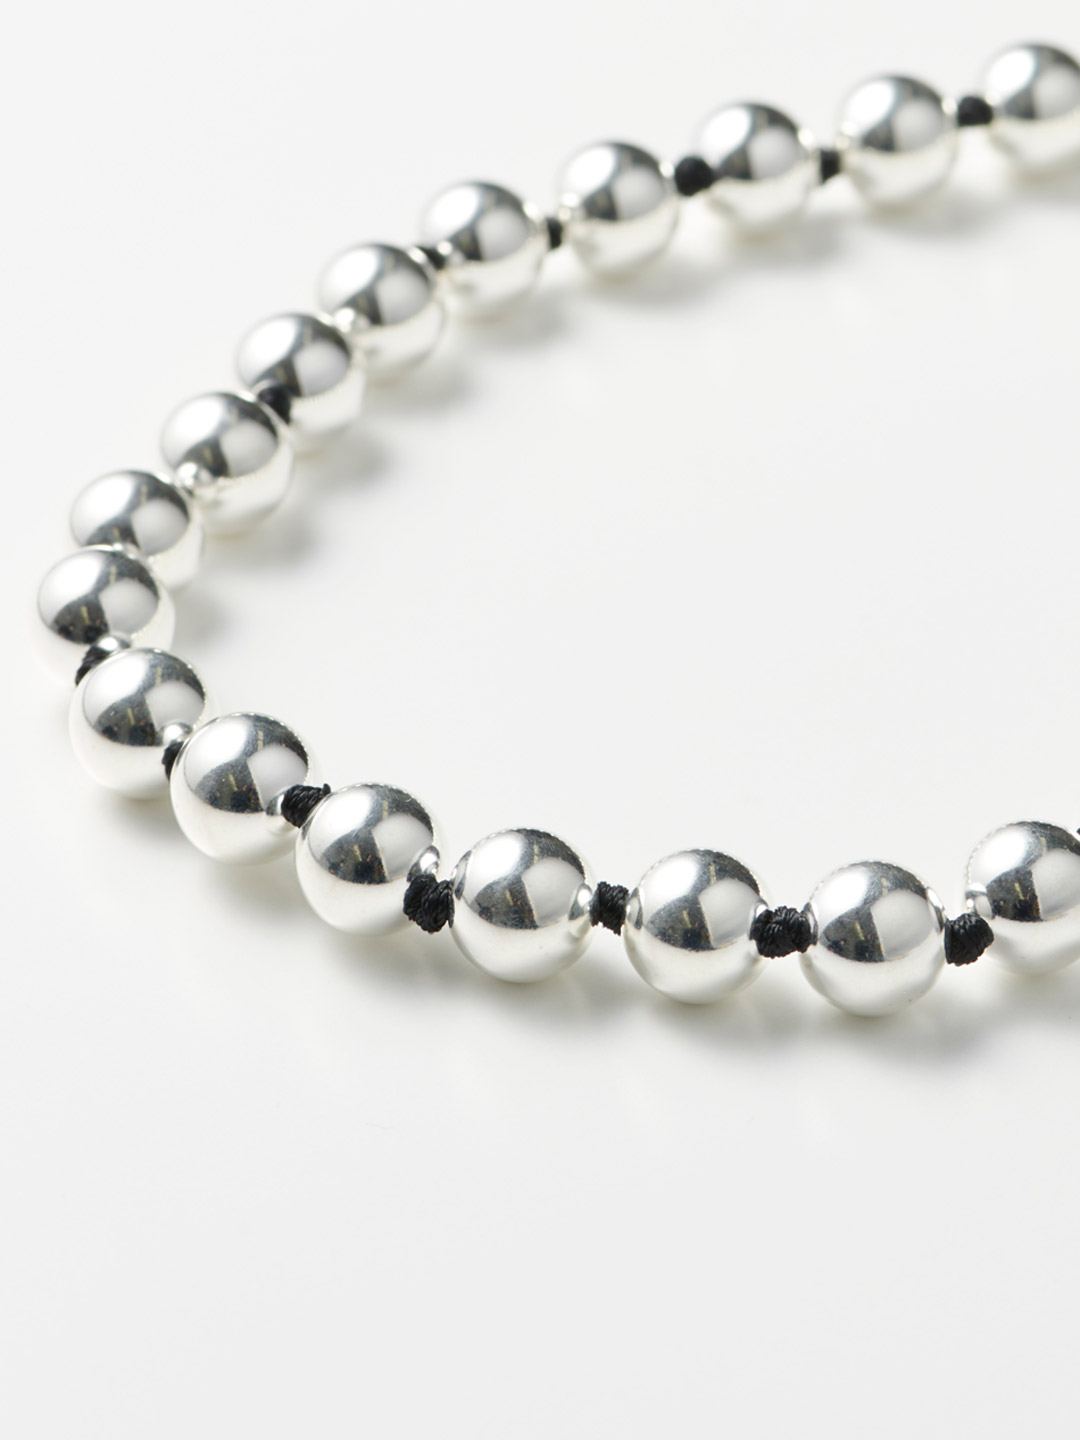 Orb Collar Necklace - Silver